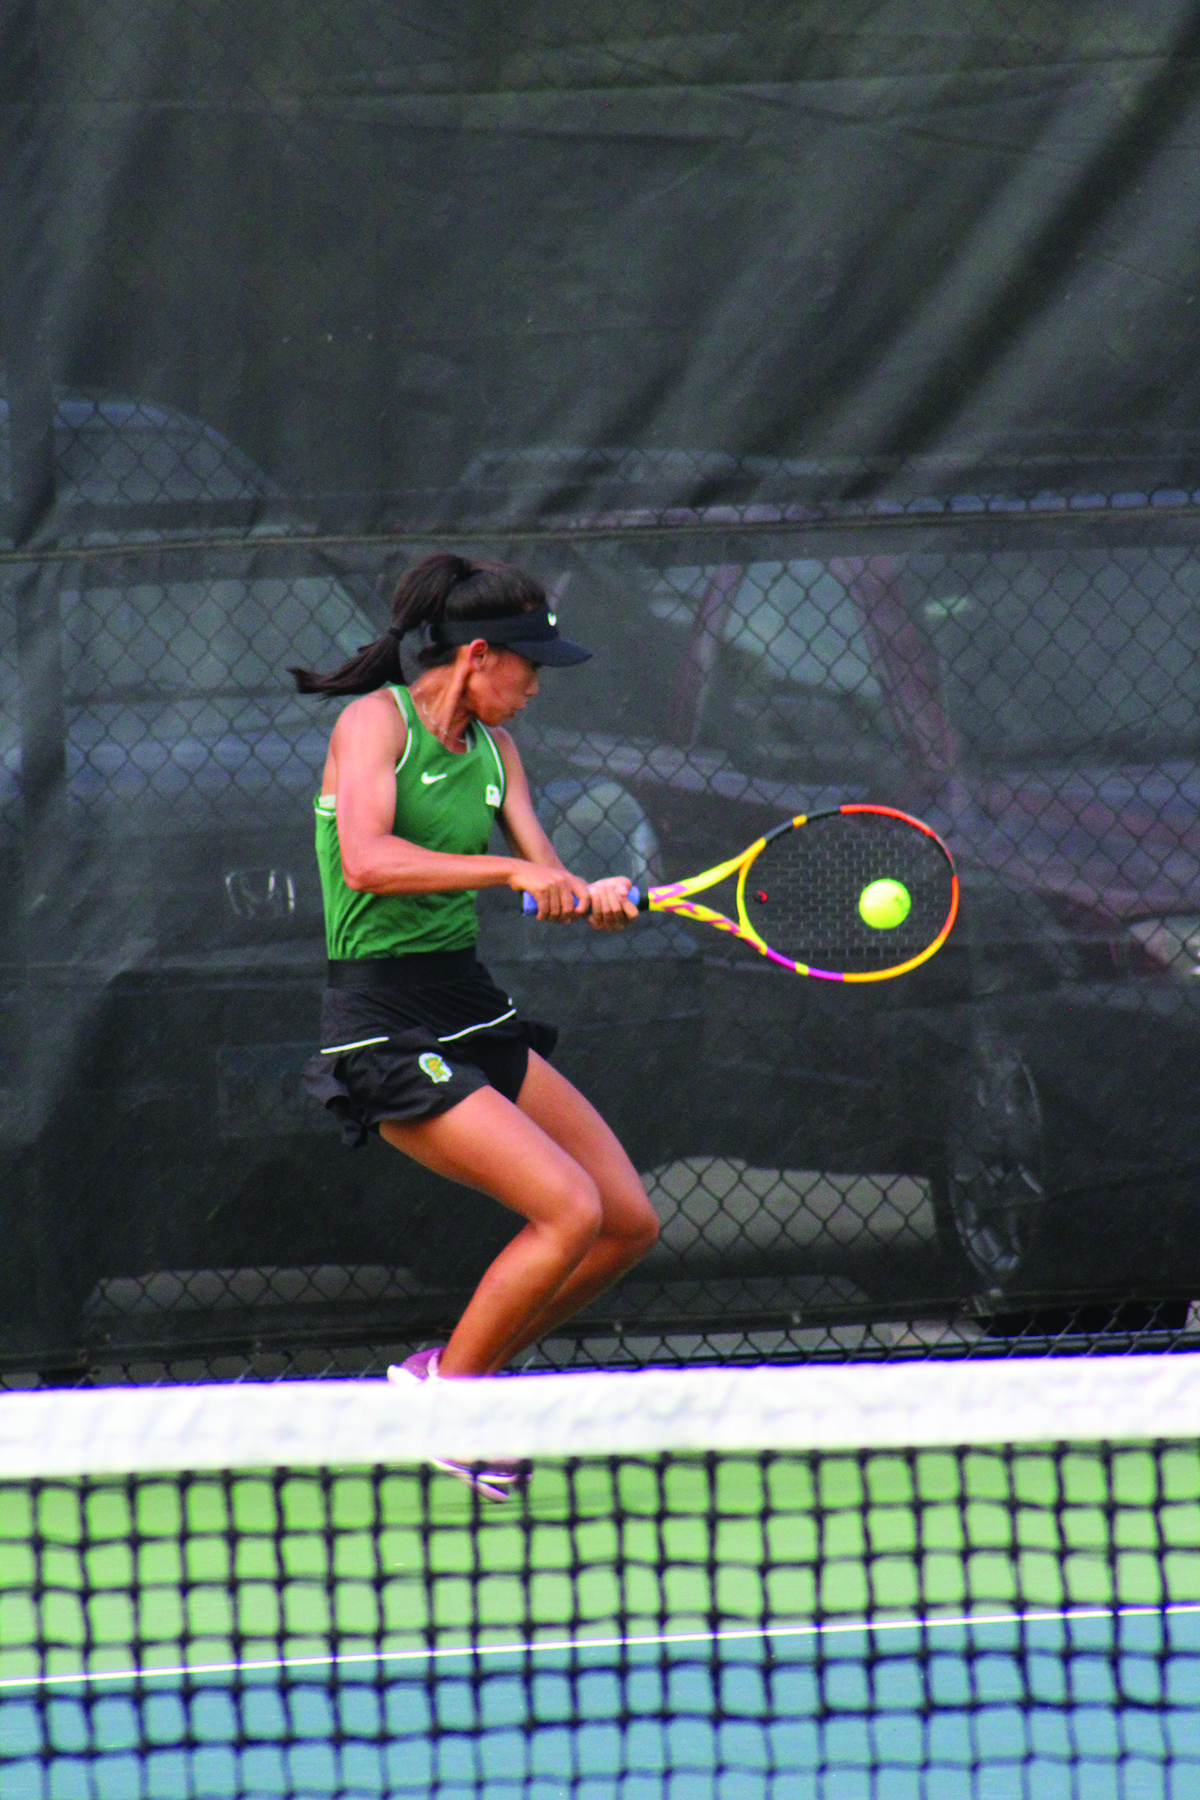 Sophomore Katelyn Wu hits her backhand shot in a match against Libertyville on Sept. 1. Wu and her competitor were close in score in the first set, but Wu lost the match. 